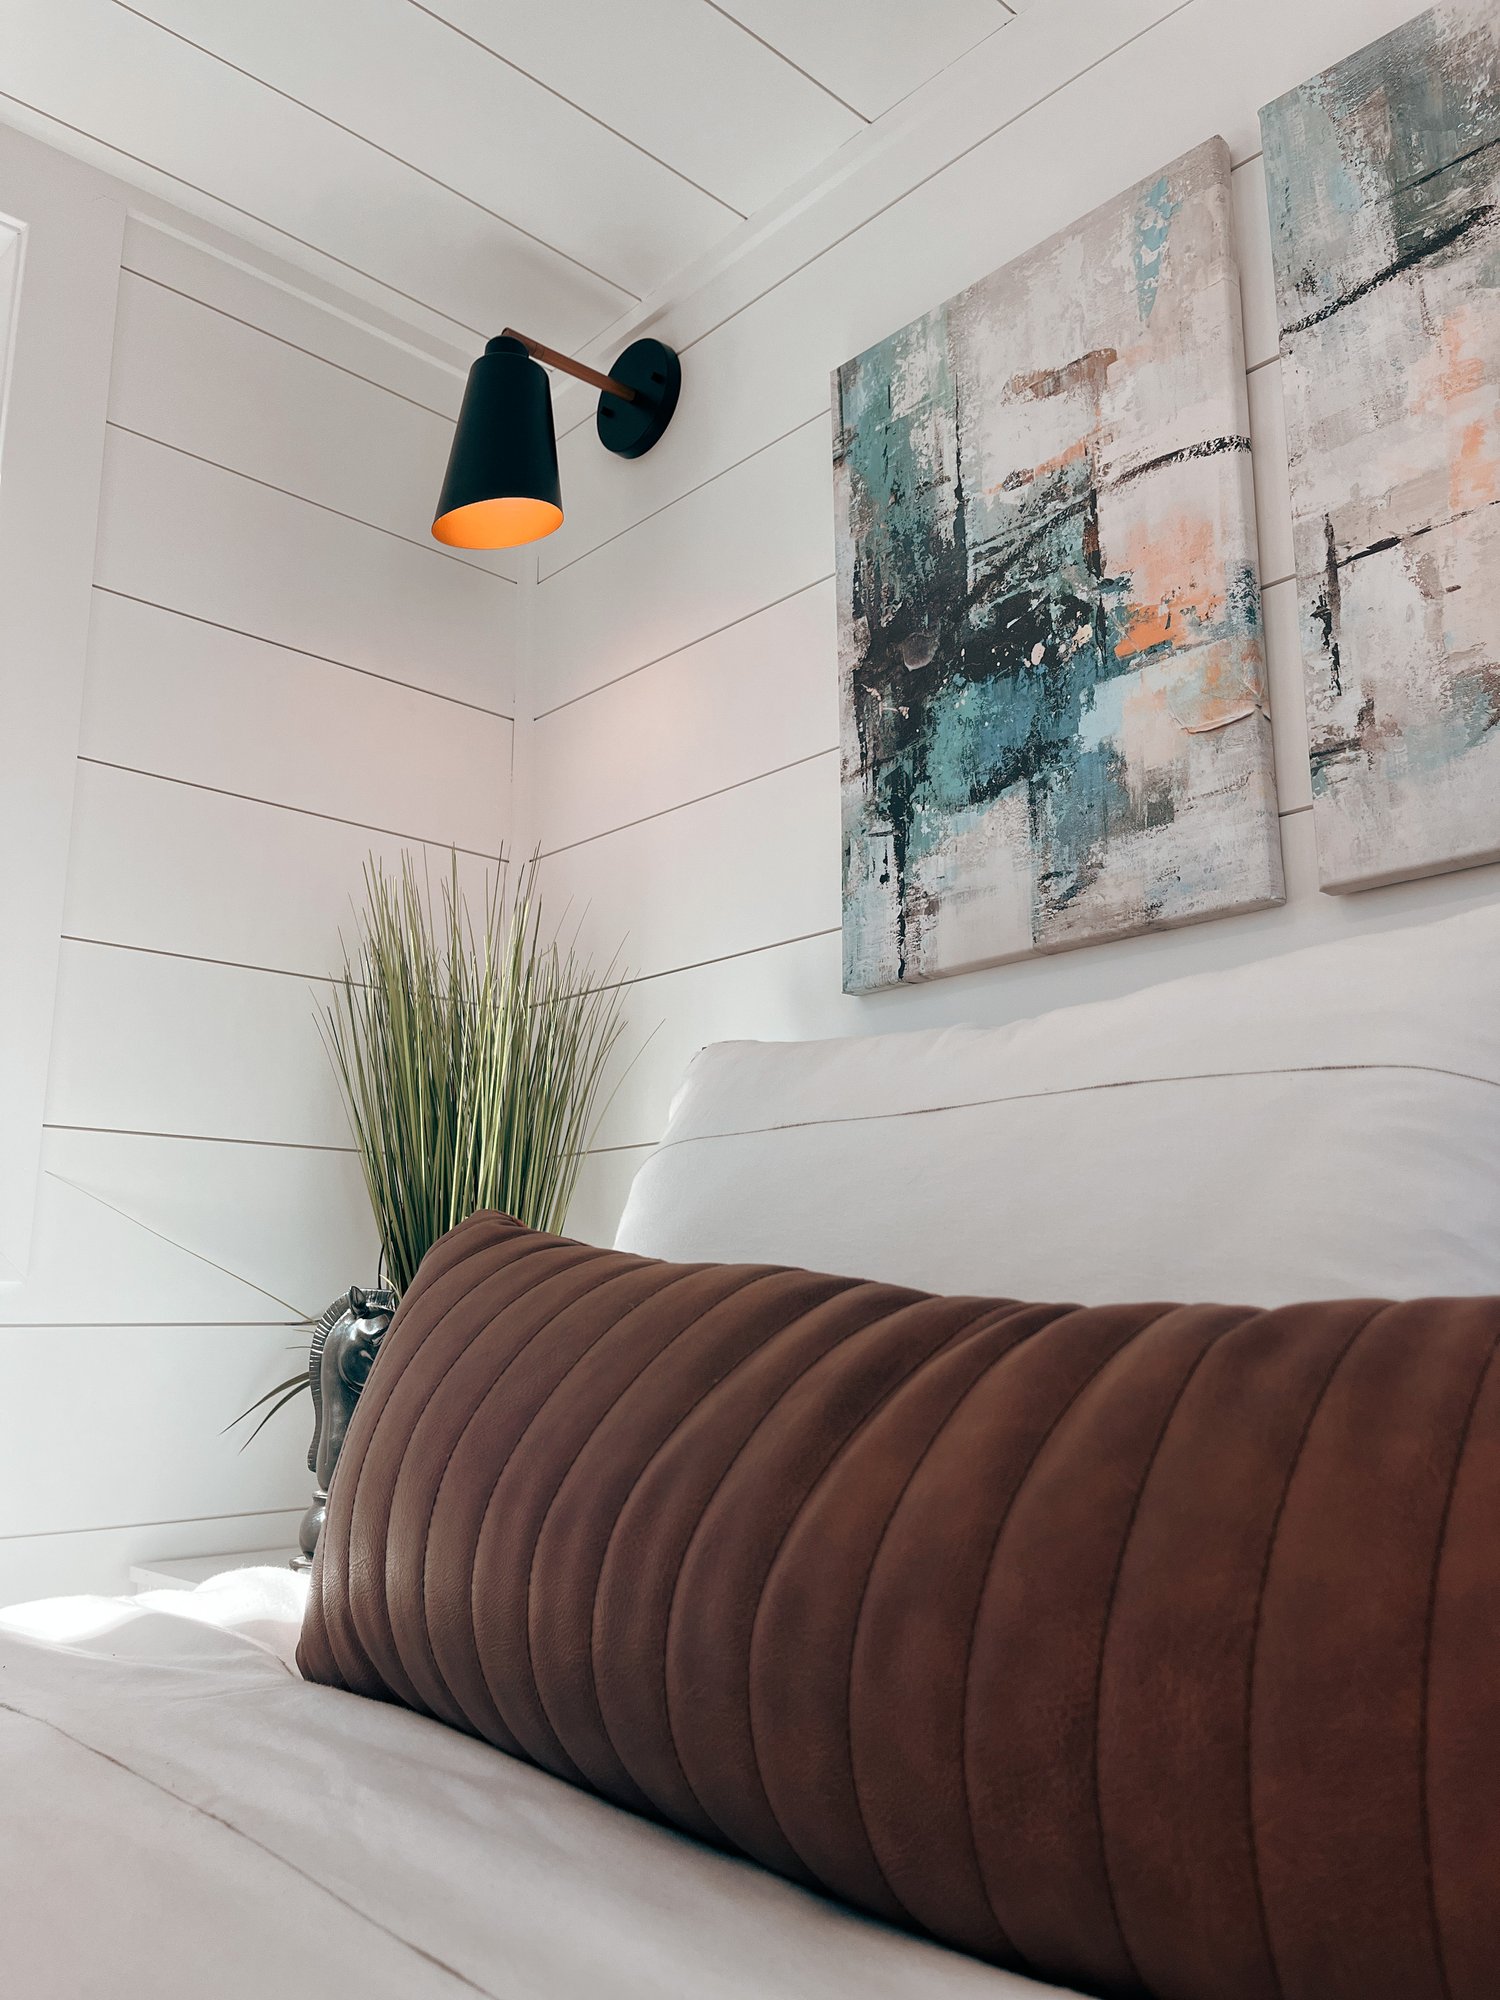 Bedroom Decor - Estate by Uncharted Tiny Homes